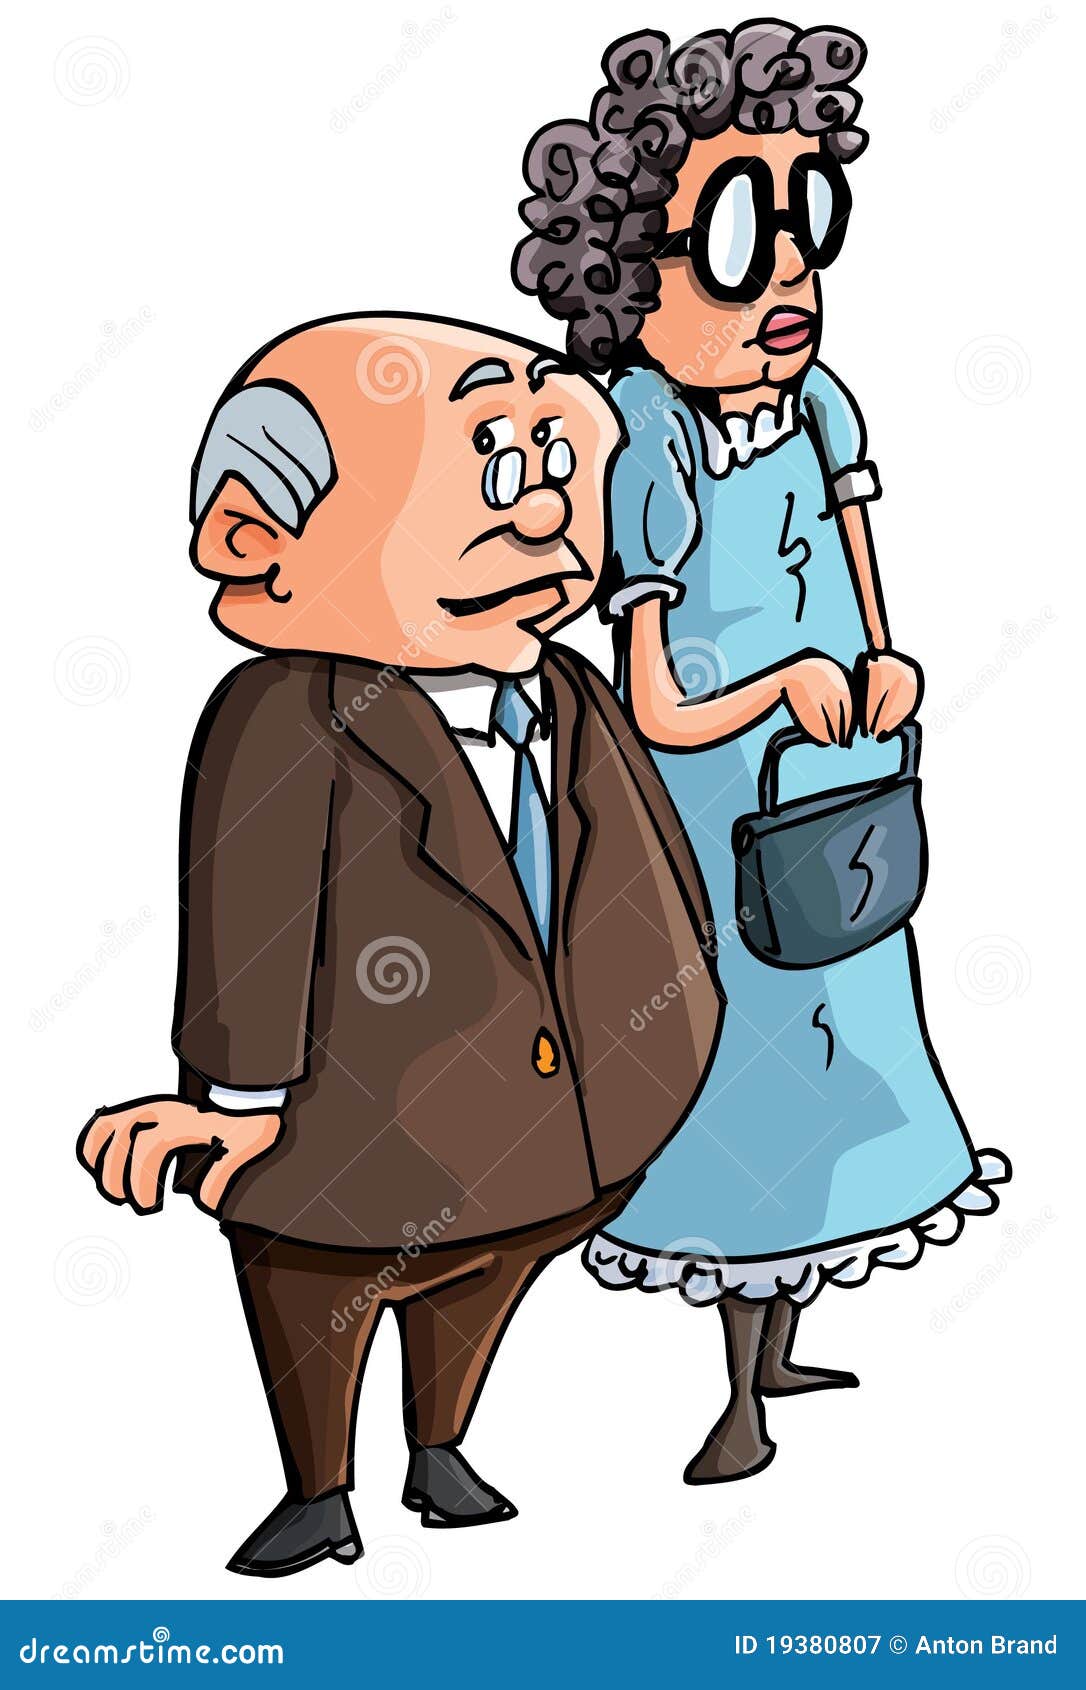 Cartoon of old couple stock vector. Illustration of hand - 19380807